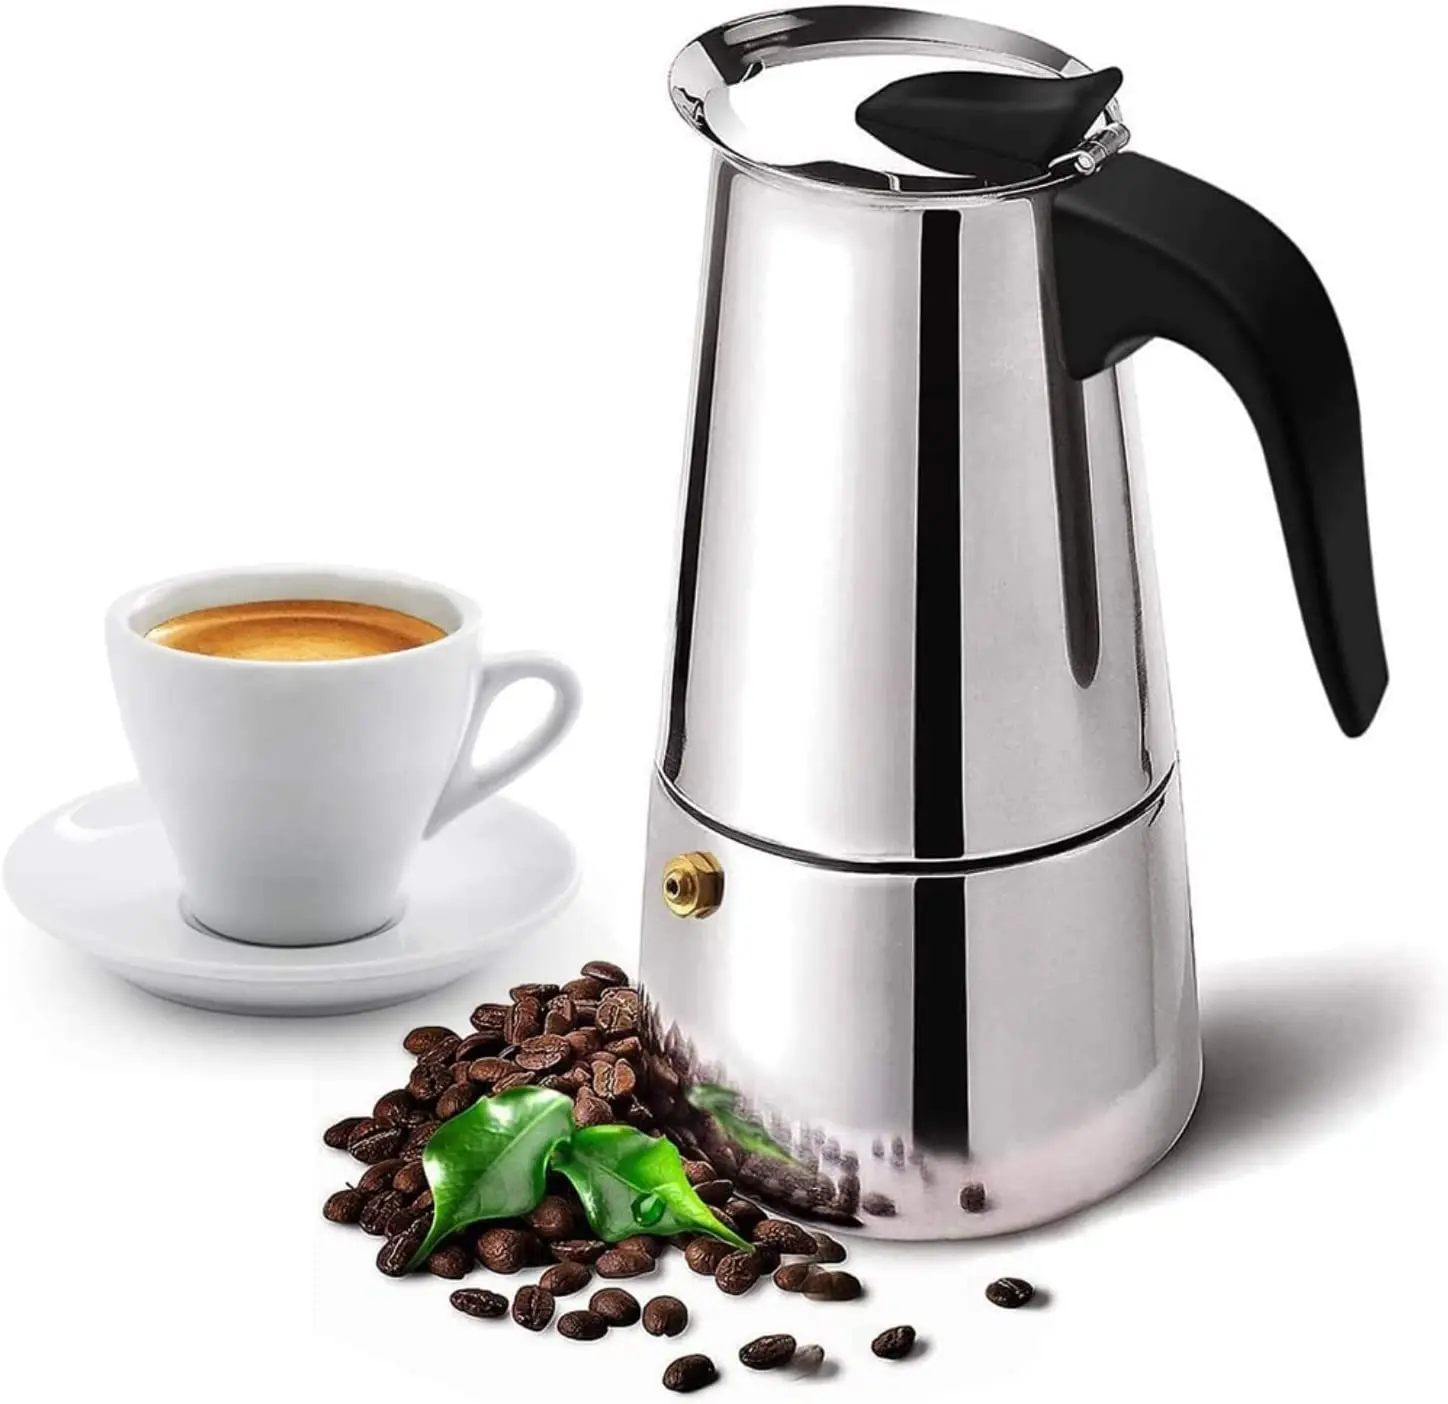 

Stainless Steel Coffee Pot Mocha Espresso Stove Maker Percolator Camping Drink Tool Cafetiere for Cappuccino or Latte Stovetop